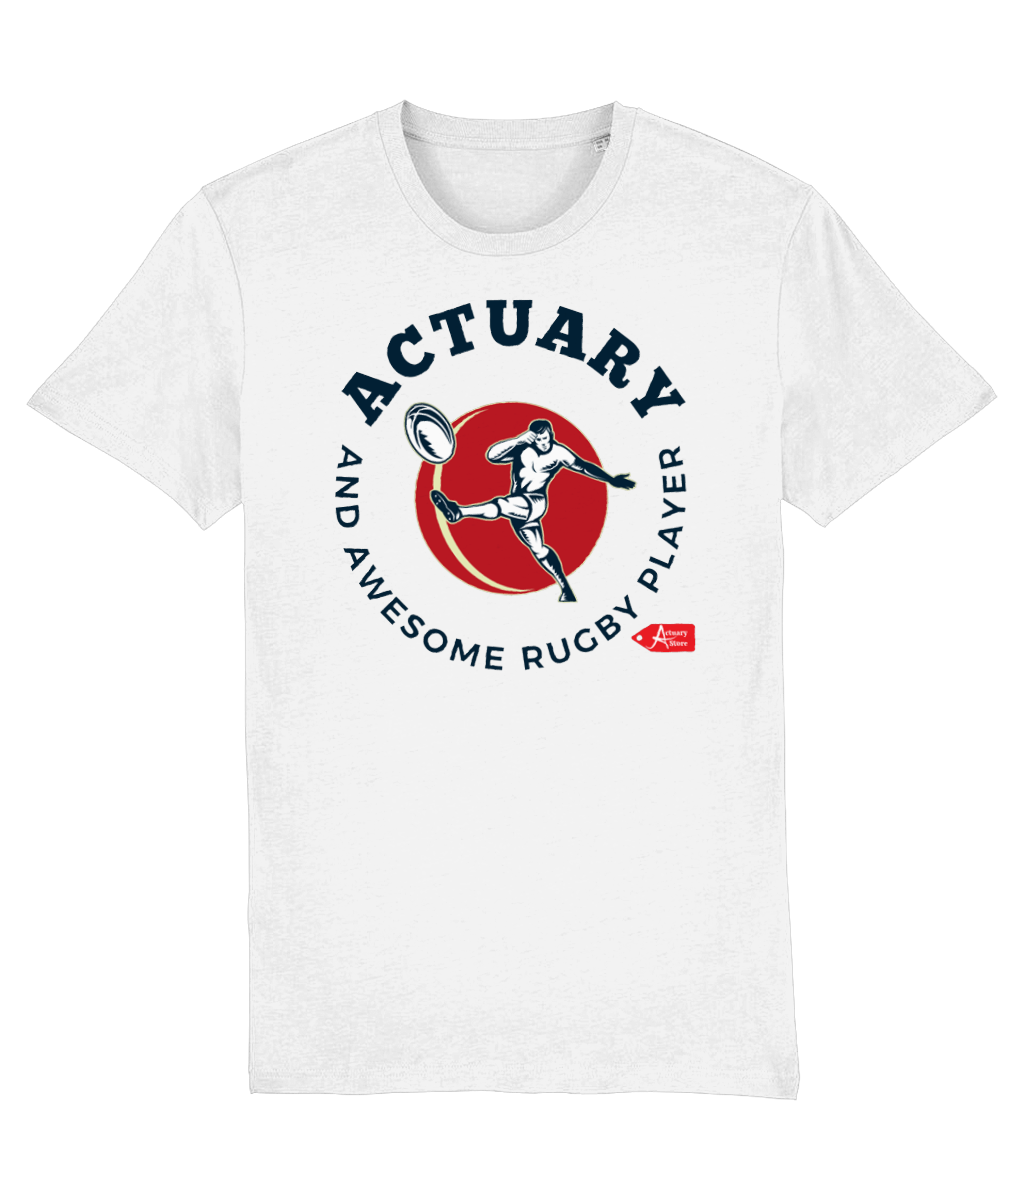 Actuary and Awesome Rugby Player White T-Shirt